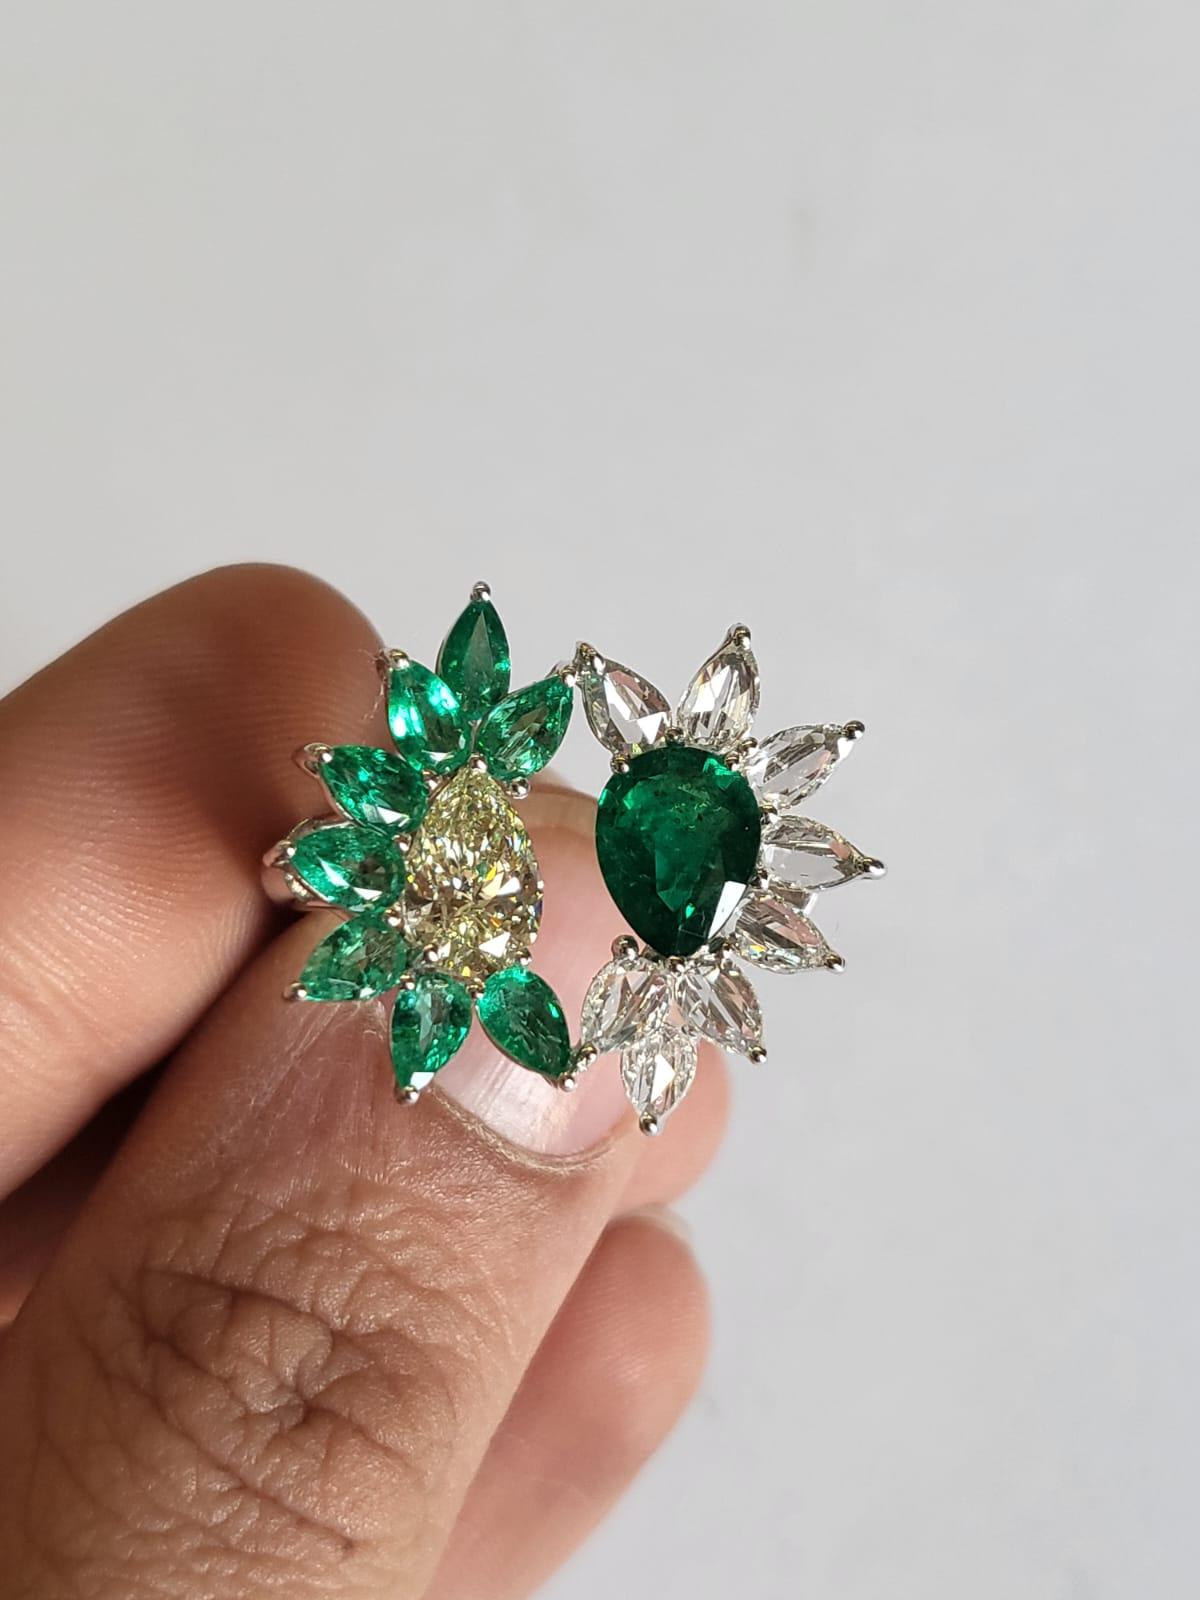 A very gorgeous and one of  kind, Emerald Engagement Ring set in 18K White Gold & Diamonds. The weight of the centre pear shaped Emerald is 1.65 carats. The weight of the other Emerald is 1.27 carats.  Both the Emeralds are completely natural,